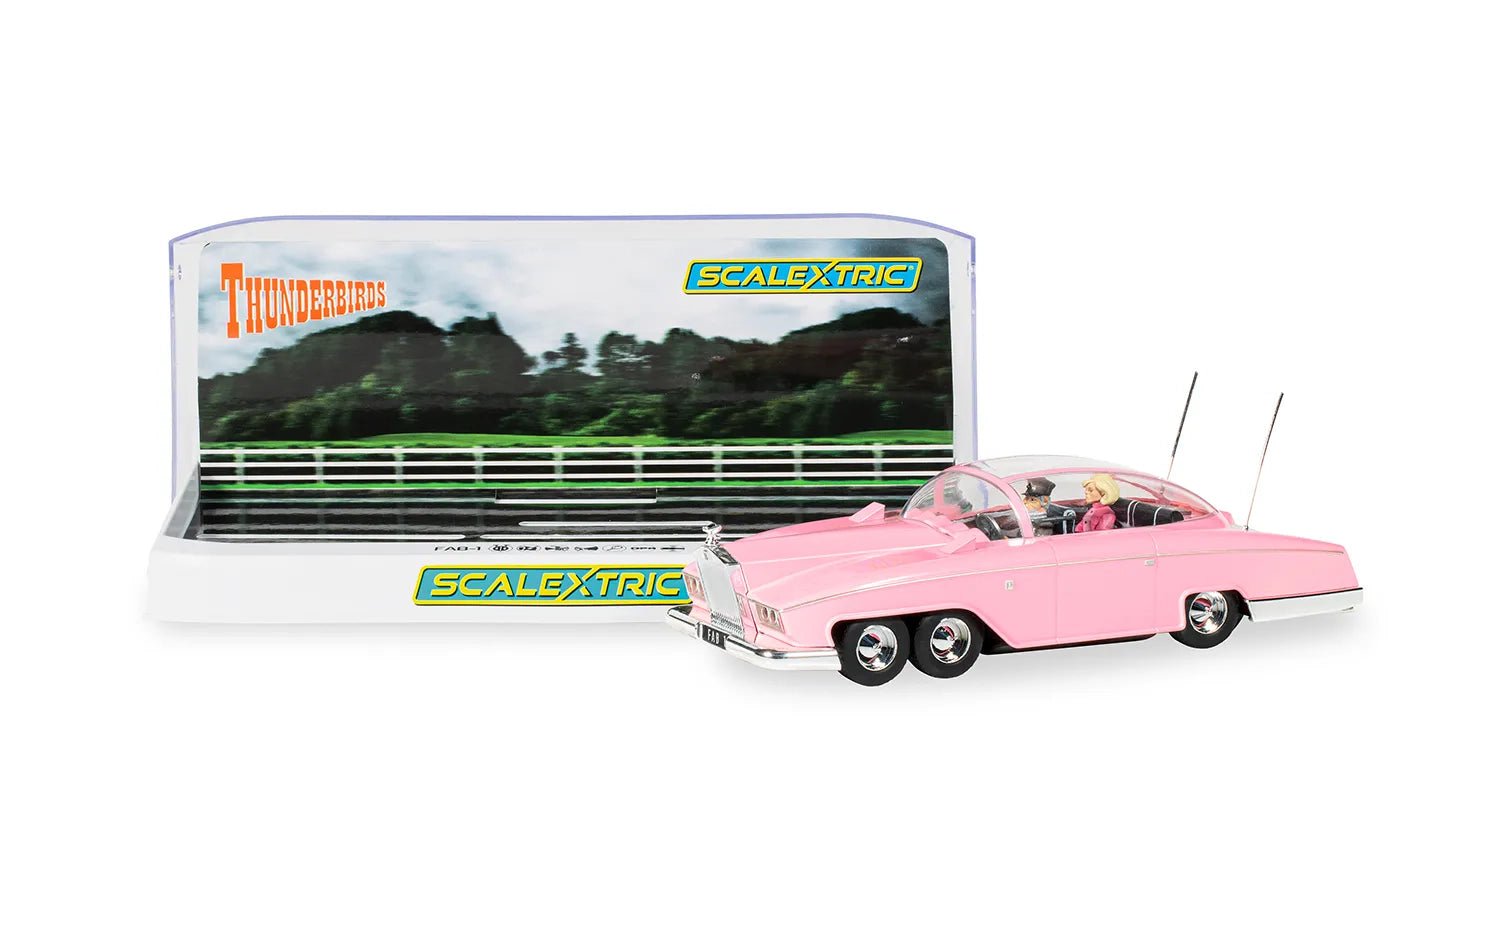 Thunderbirds FAB1 [SCALEXTRIC] - The Gerry Anderson Store